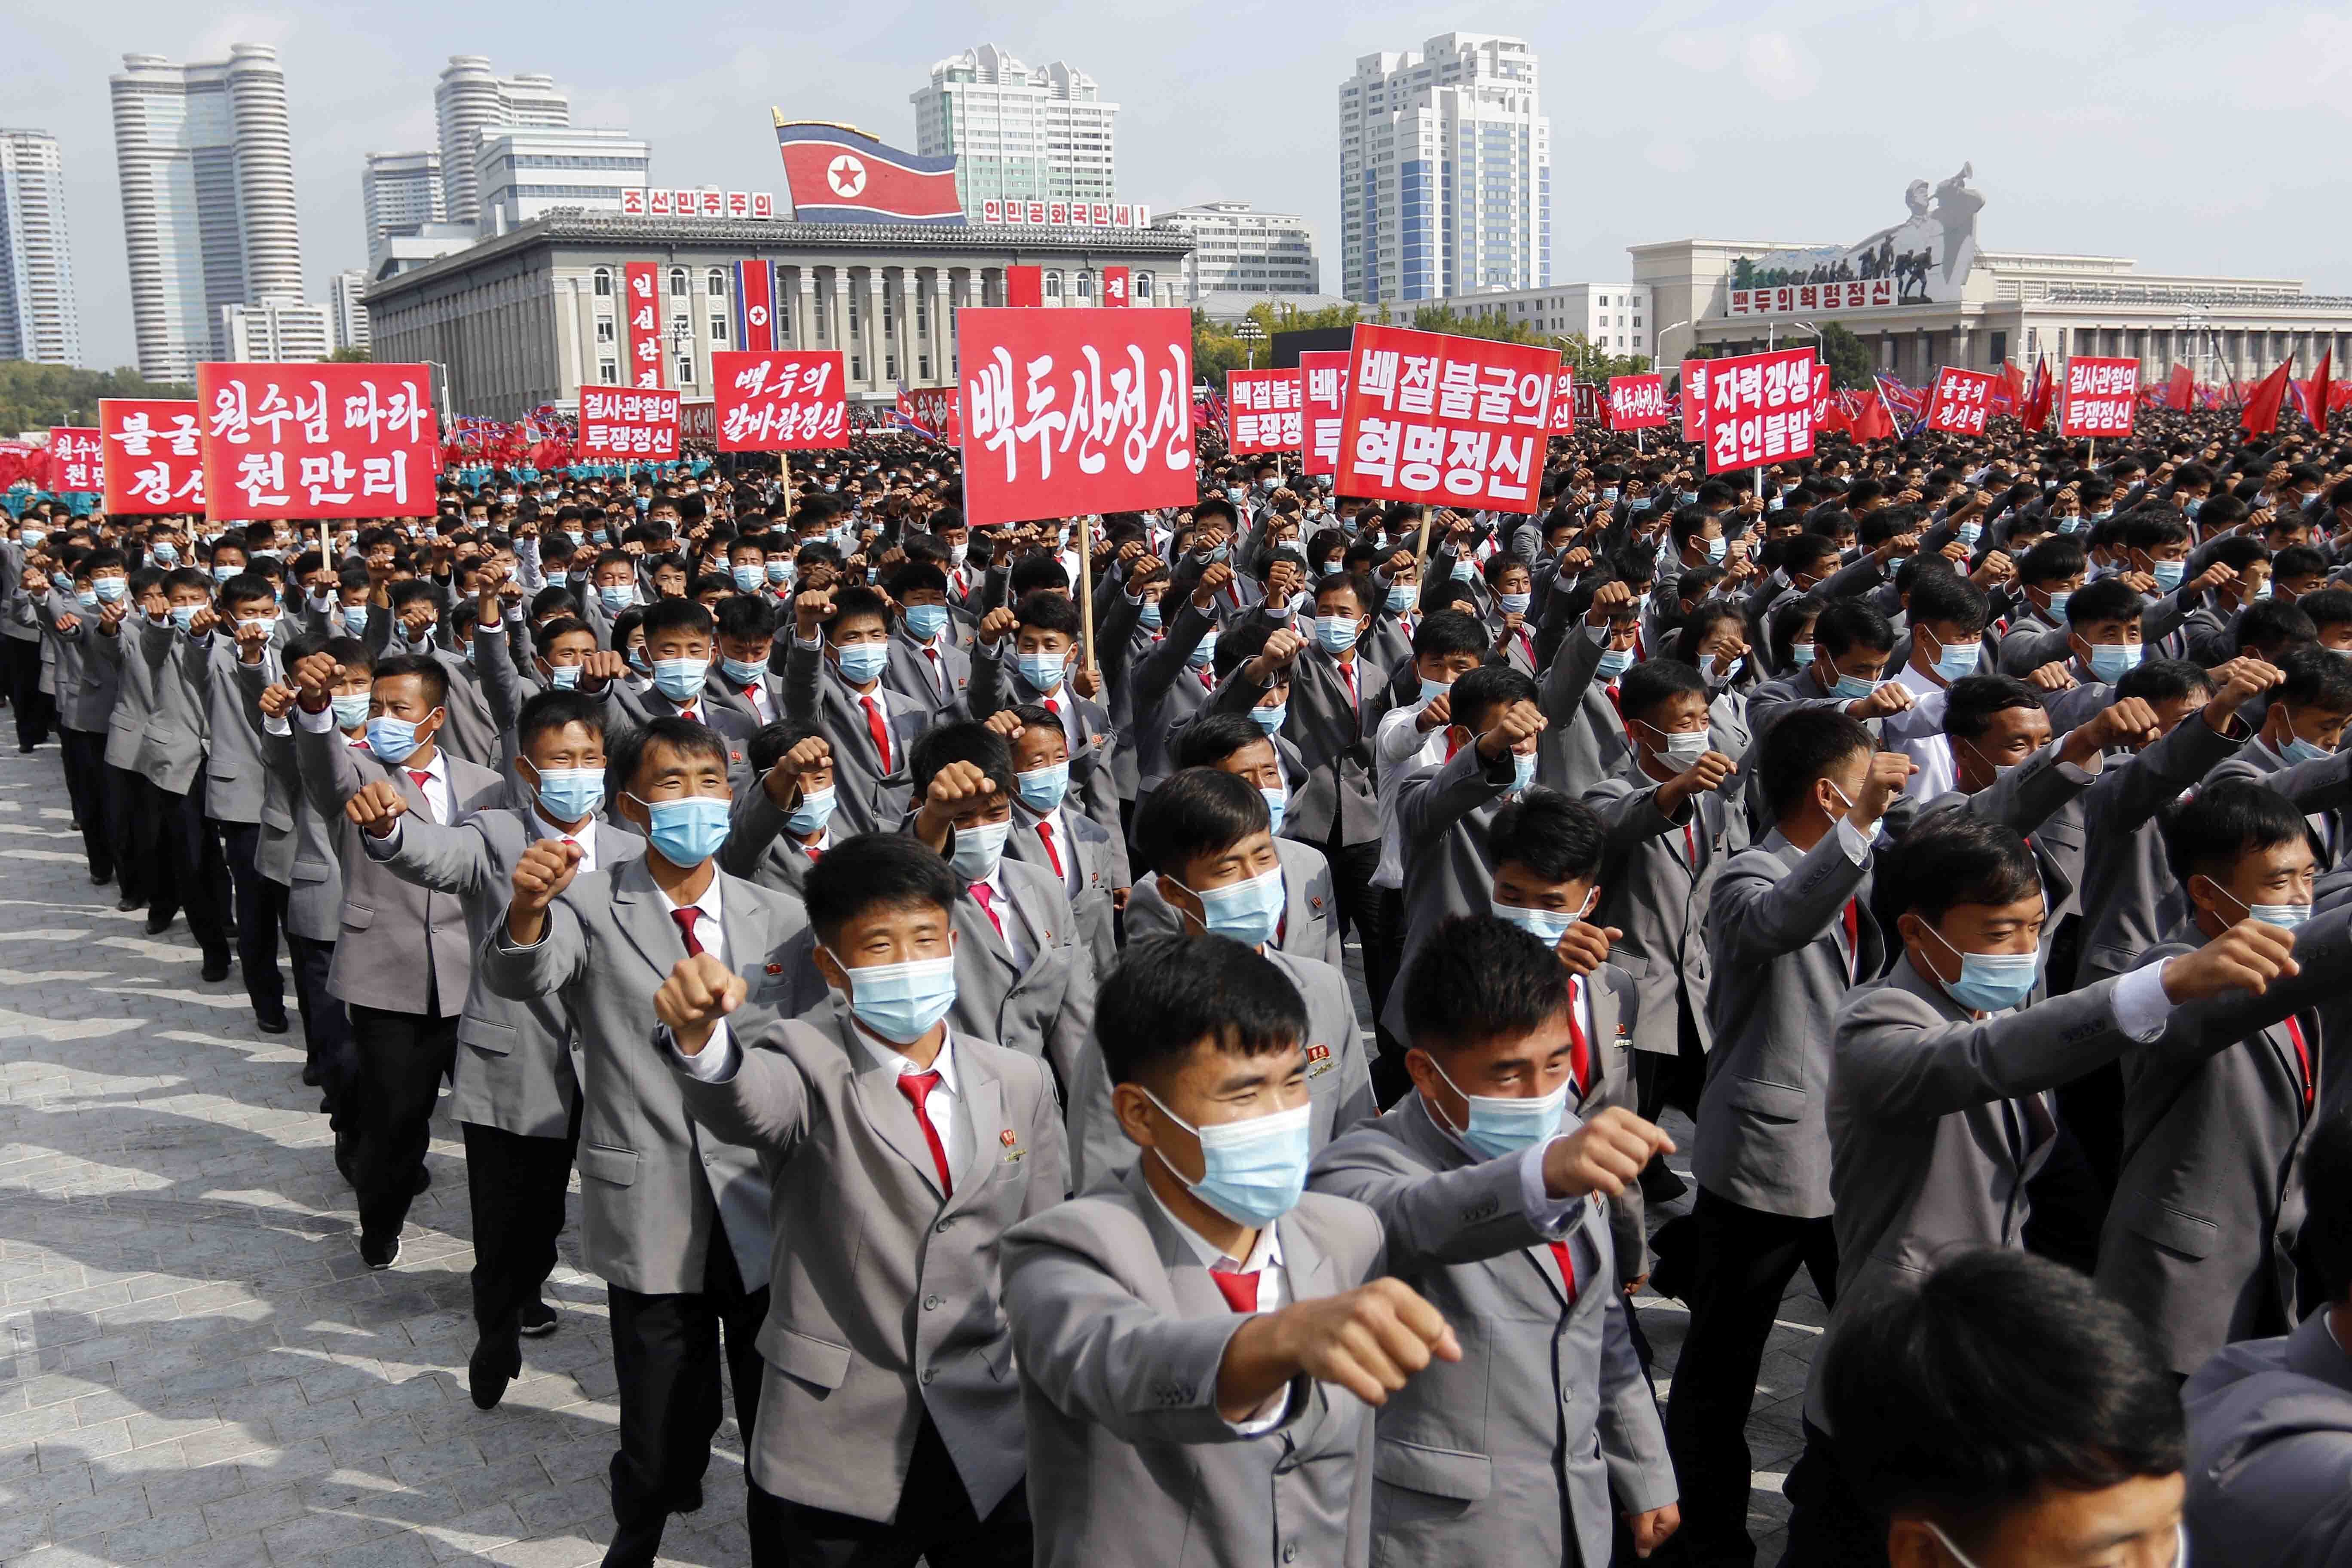 Thousands rally to welcome the 8th Congress of the Workers' Party of Korea in the Party at Kim Il Sung Square in Pyongyang, North Korea, Monday, Oct. 12, 2020. (AP Photo/Jon Chol Jin)